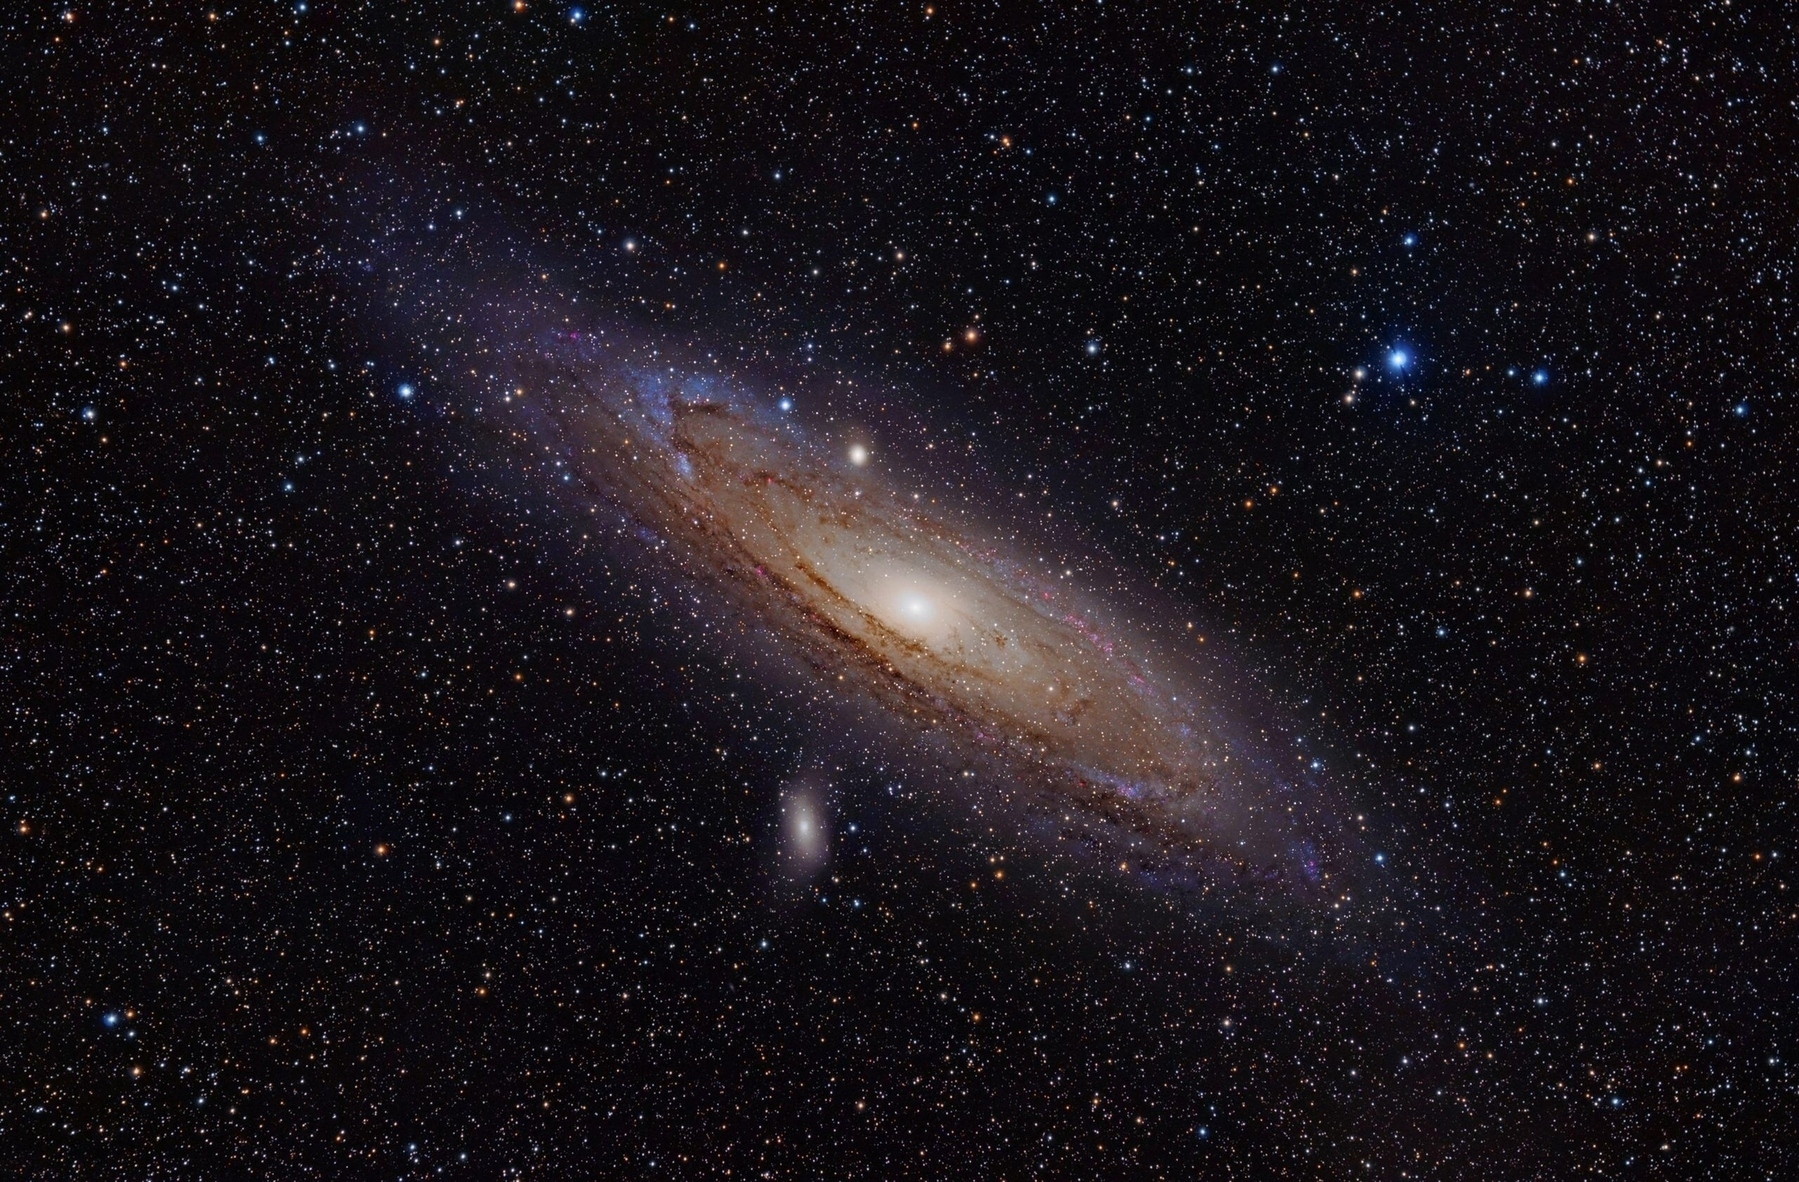 The Andromeda Galaxy is the largest galaxy of the Local Group which consists of about 45 other galaxies including our Milky Way.